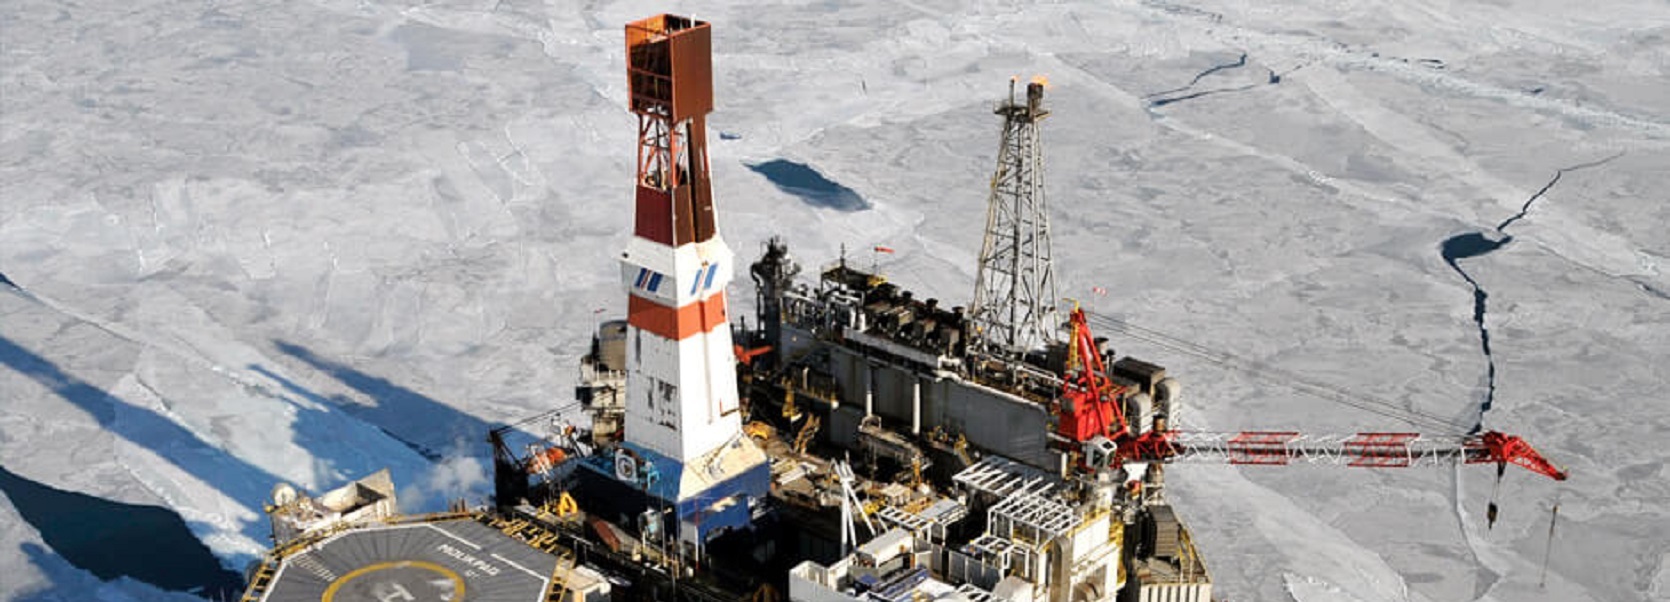 Image: Molikpaq Project: Arctic engineering for first oil production platform in Russian Arctic